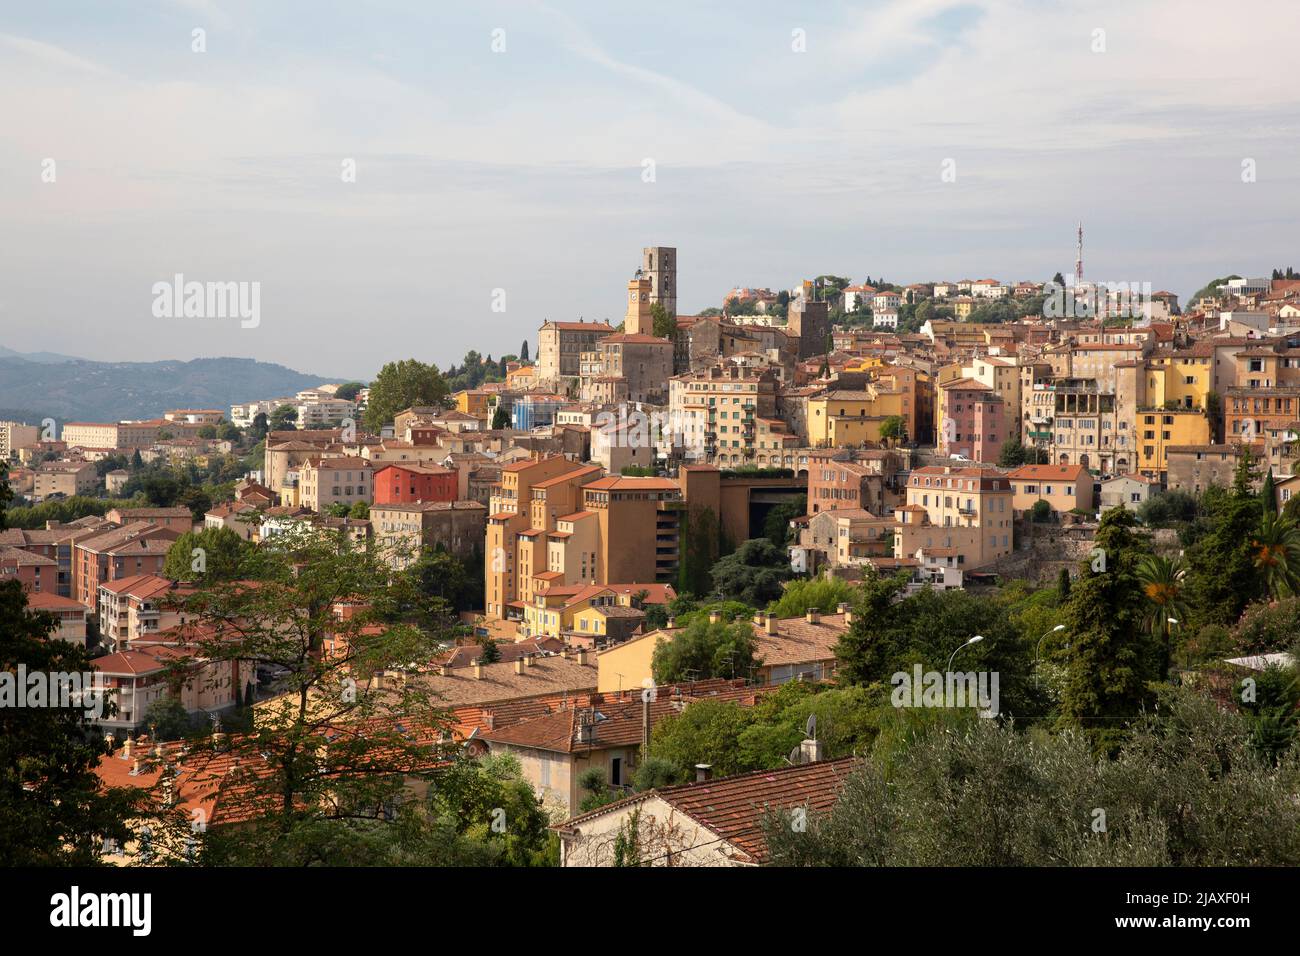 A view of Grasse, France on September 10, 2021. Grasse has had a prospering perfume industry since the end of the 18th century and is considered the world's capital of perfume. There are numerous of old 'parfumeries' in Grasse, such as Galimard, Molinard and Fragonard, each with tours and a museum. Many 'noses' ('Les nez' in French) are trained or have spent time in Grasse to distinguish over 2,000 kinds of scent. Grasse produces over two-thirds of France's natural aromas (for perfume and for food flavourings). This industry turns over more than 600 million euros a year. Photograph by Bénédict Stock Photo